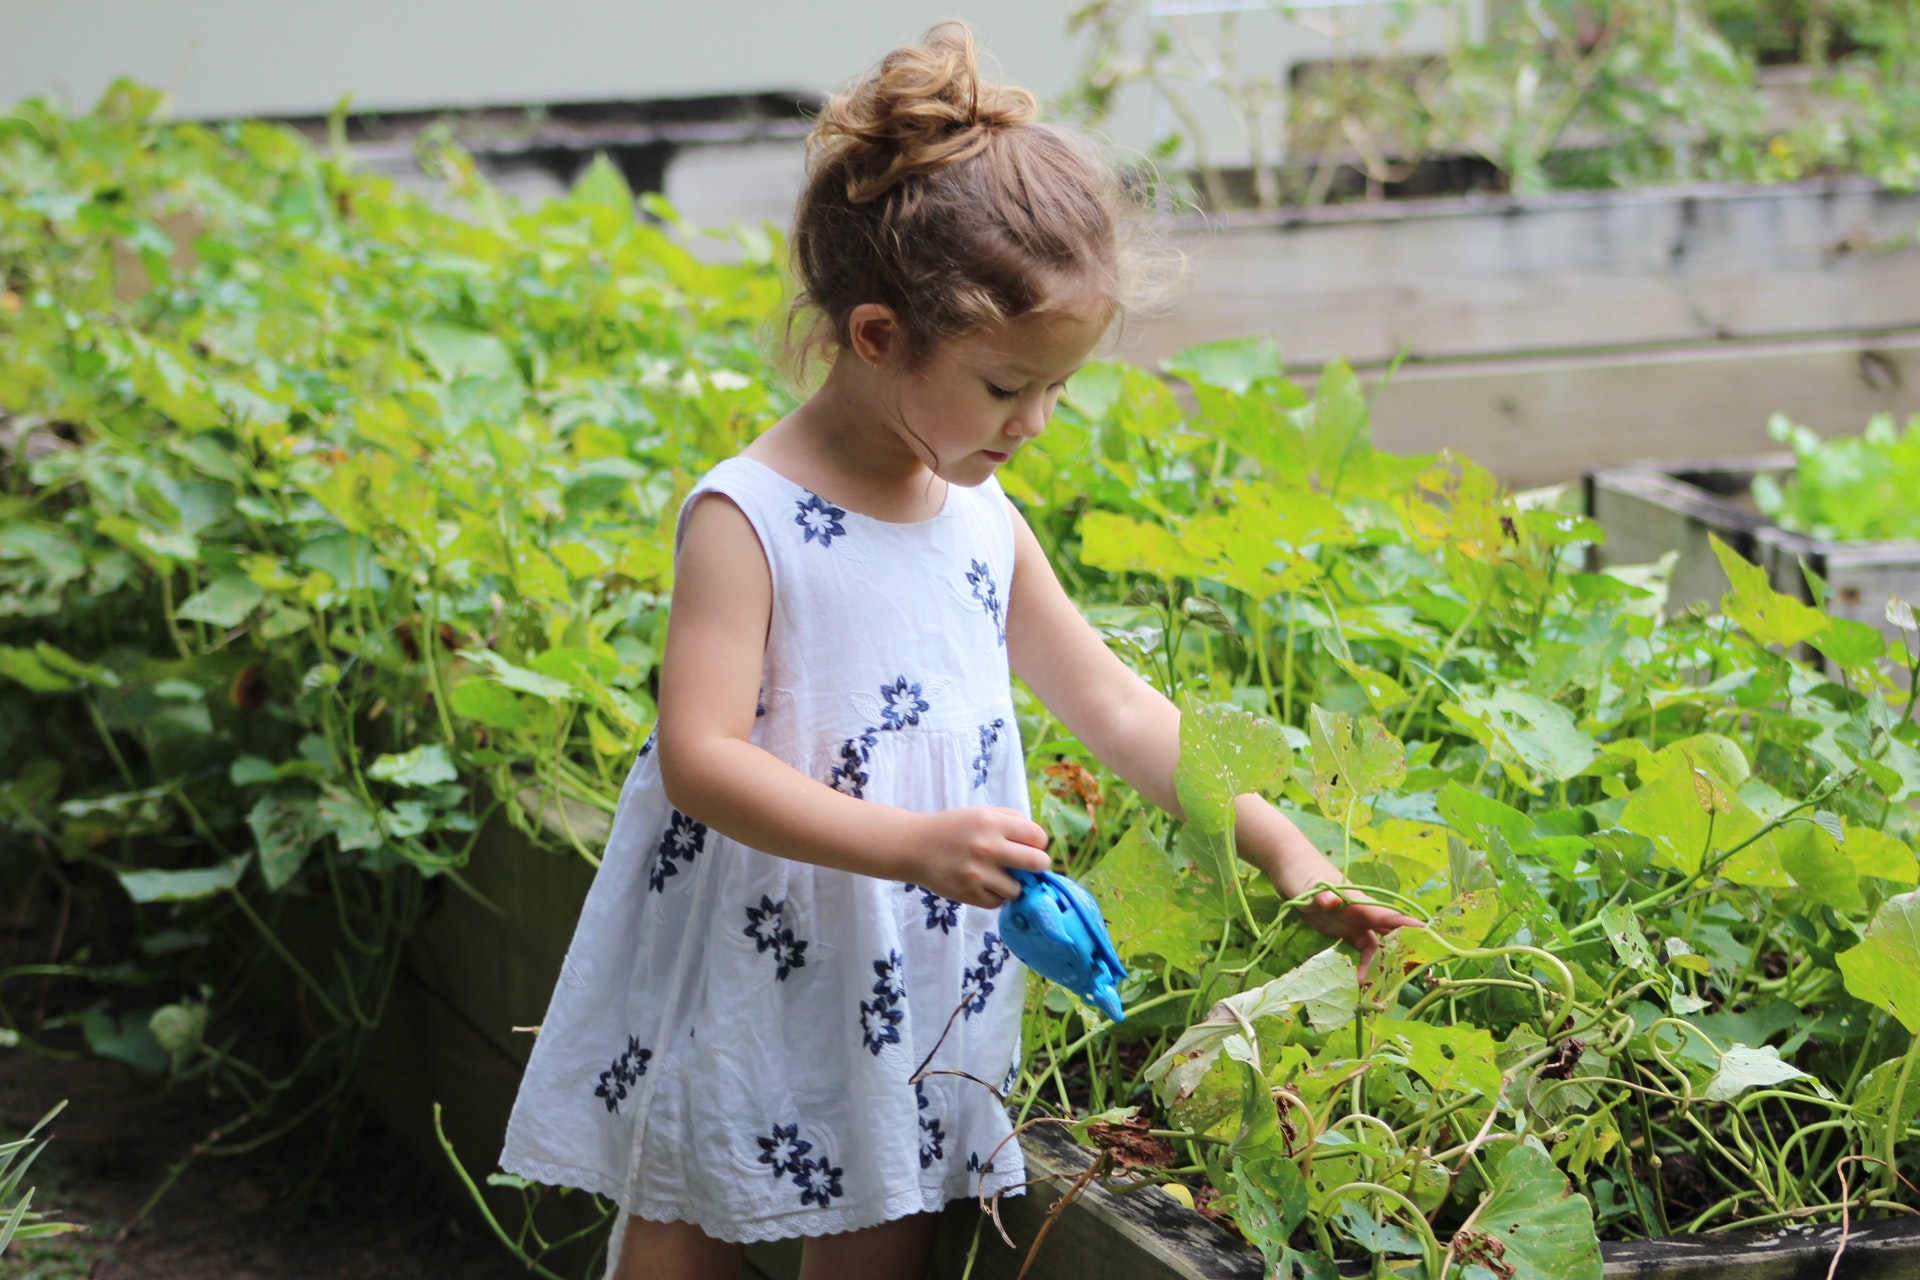 How To Make Your Garden Child-Friendly